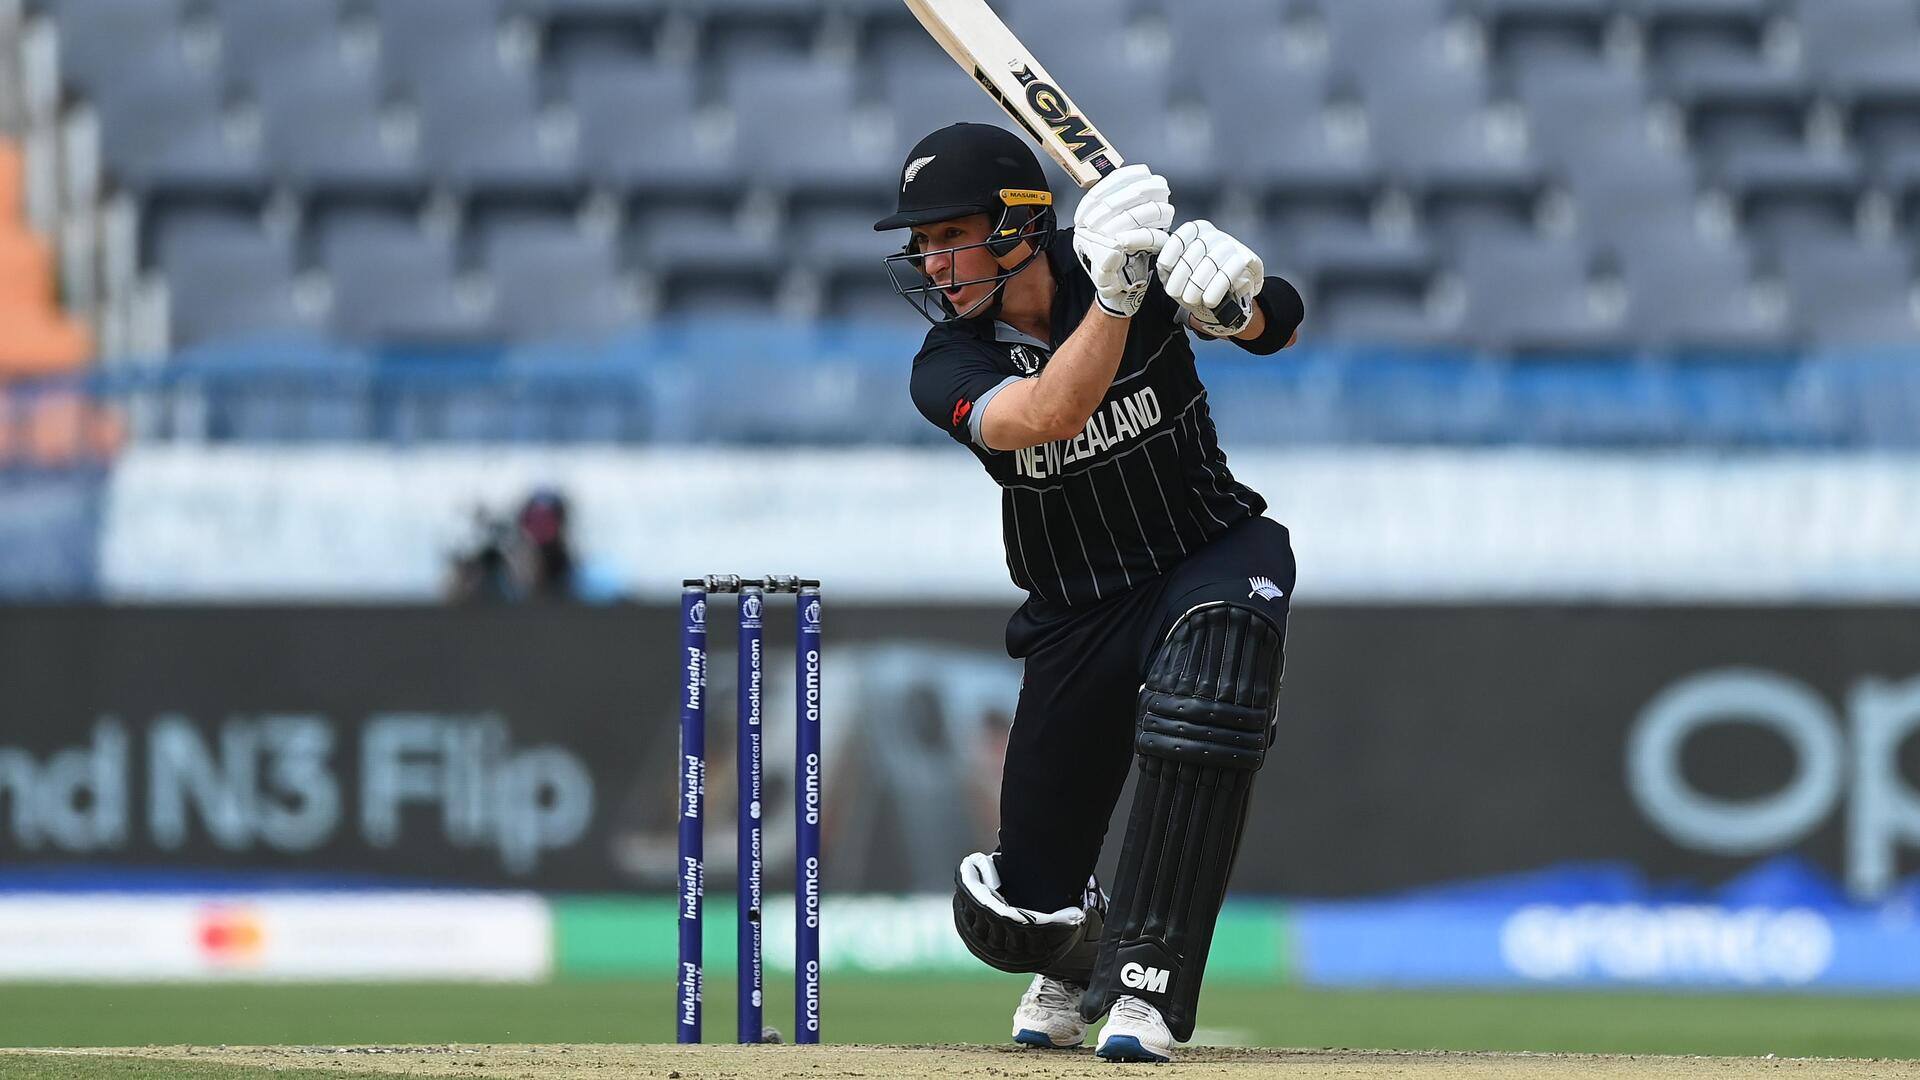 World Cup: New Zealand score 288/6 against Afghanistan in Chennai